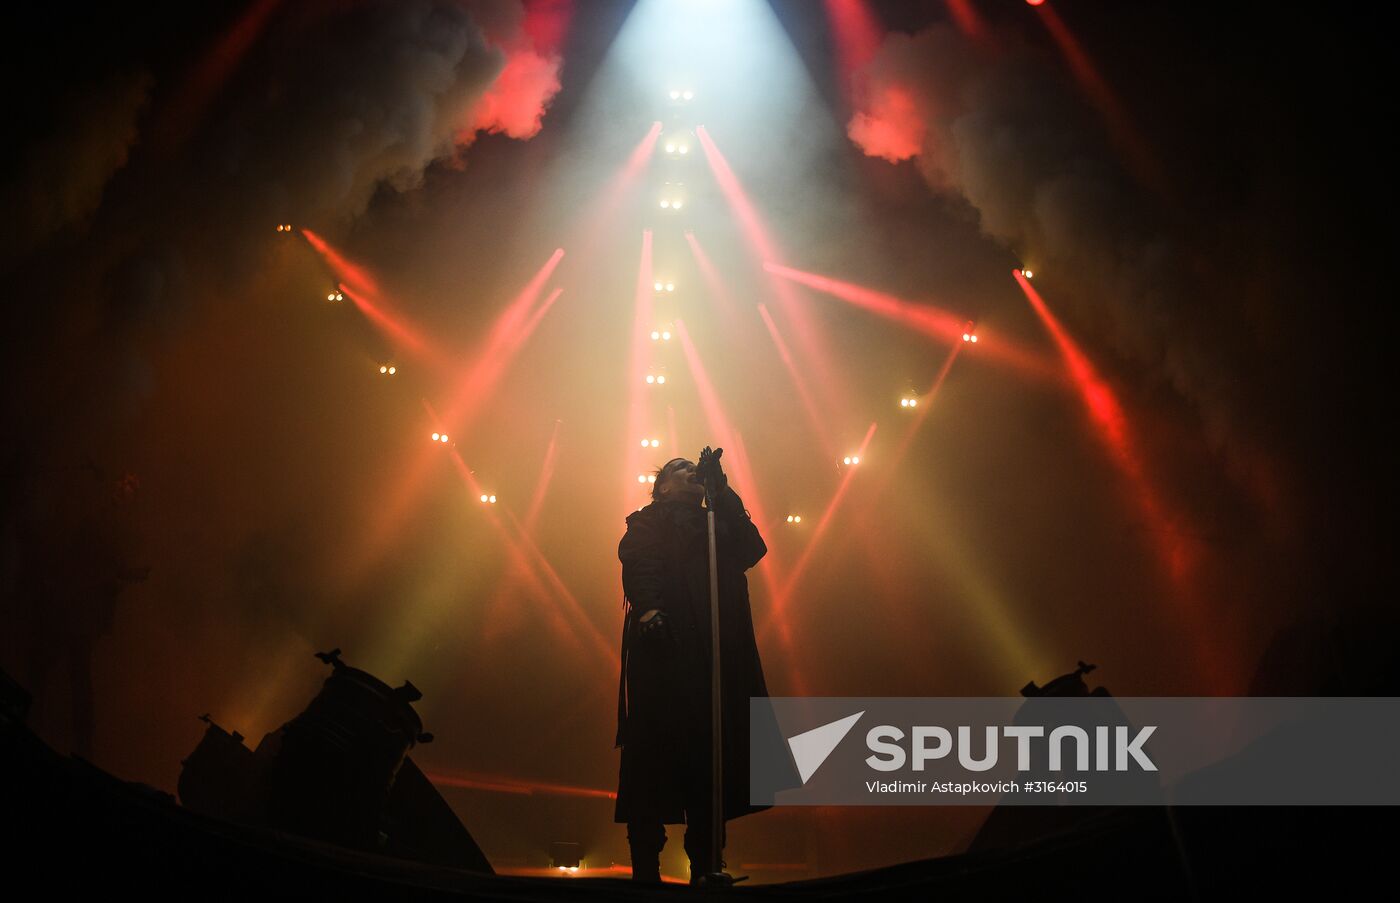 Marilyn Manson's concert in Moscow